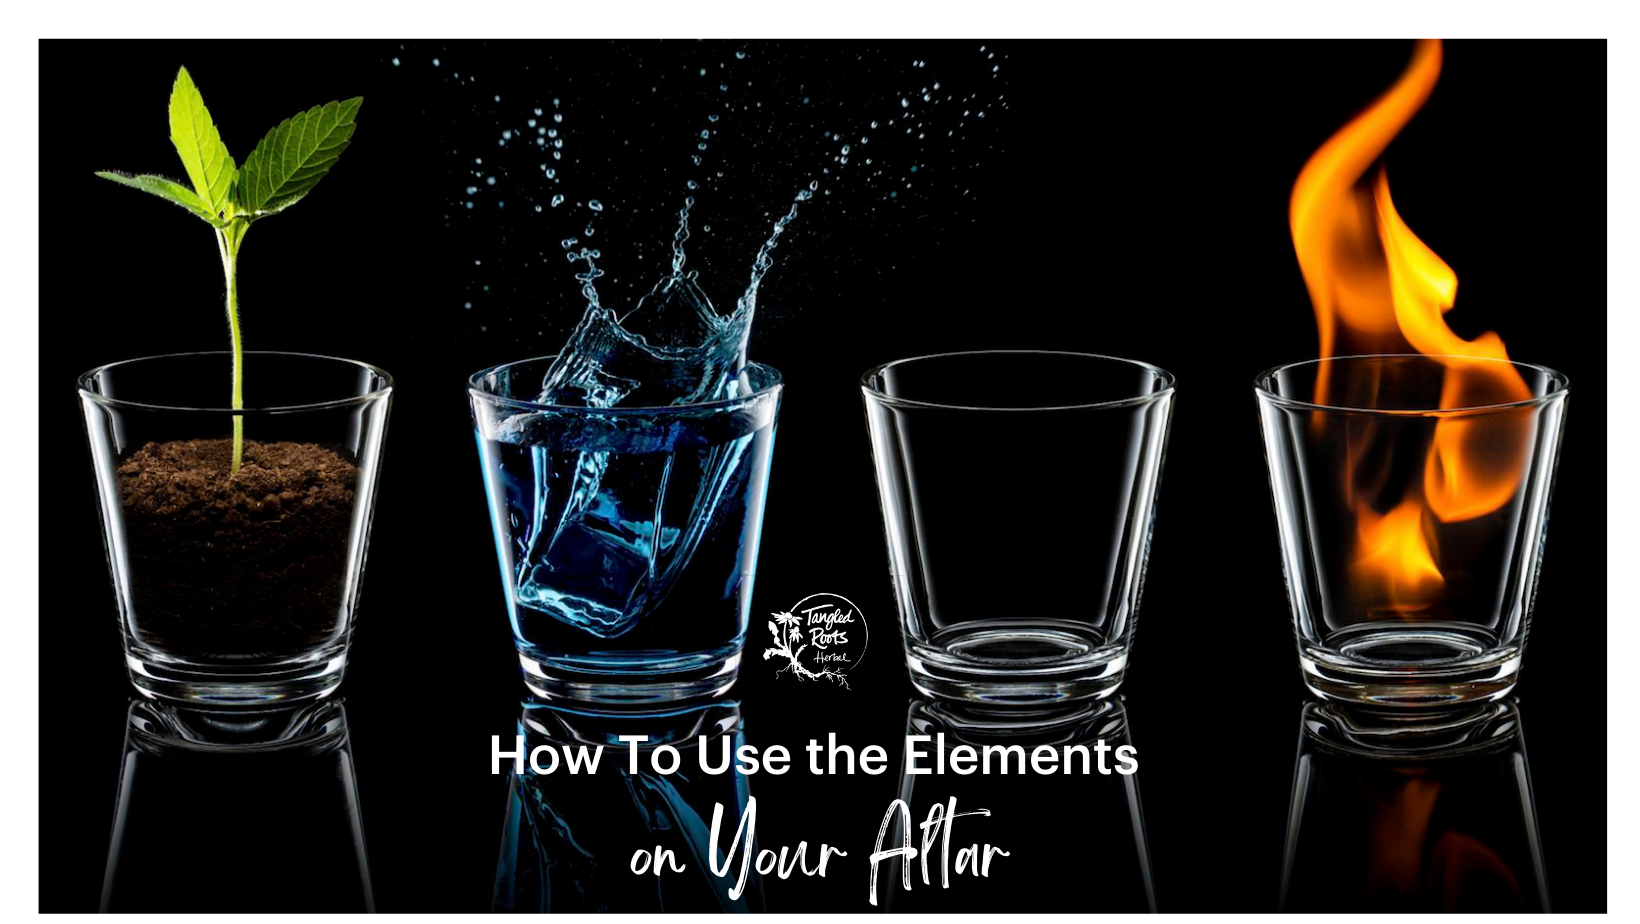 How to use the elements on your altar